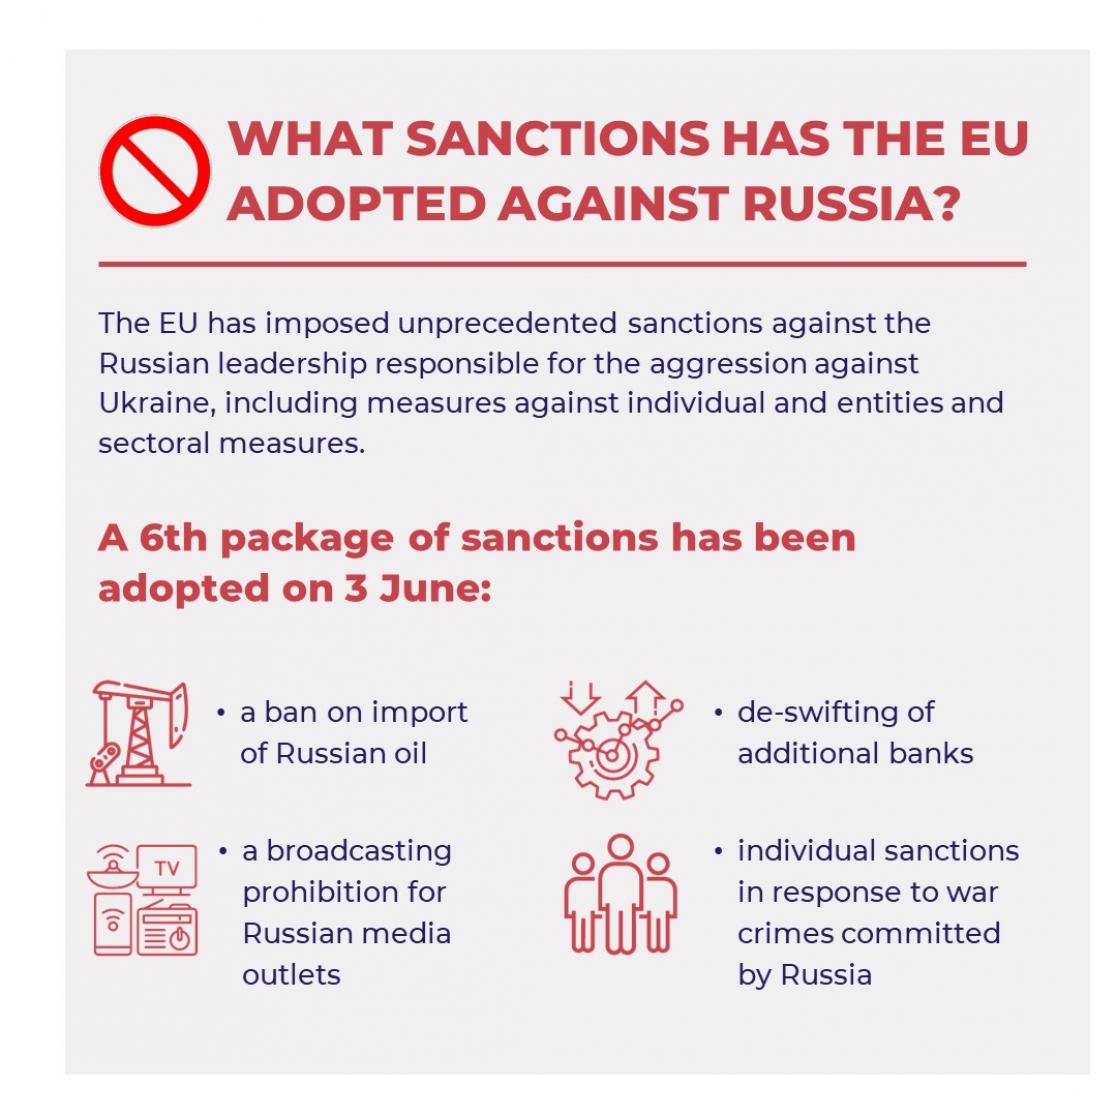 what sanctions has the EU adopted agains Russia